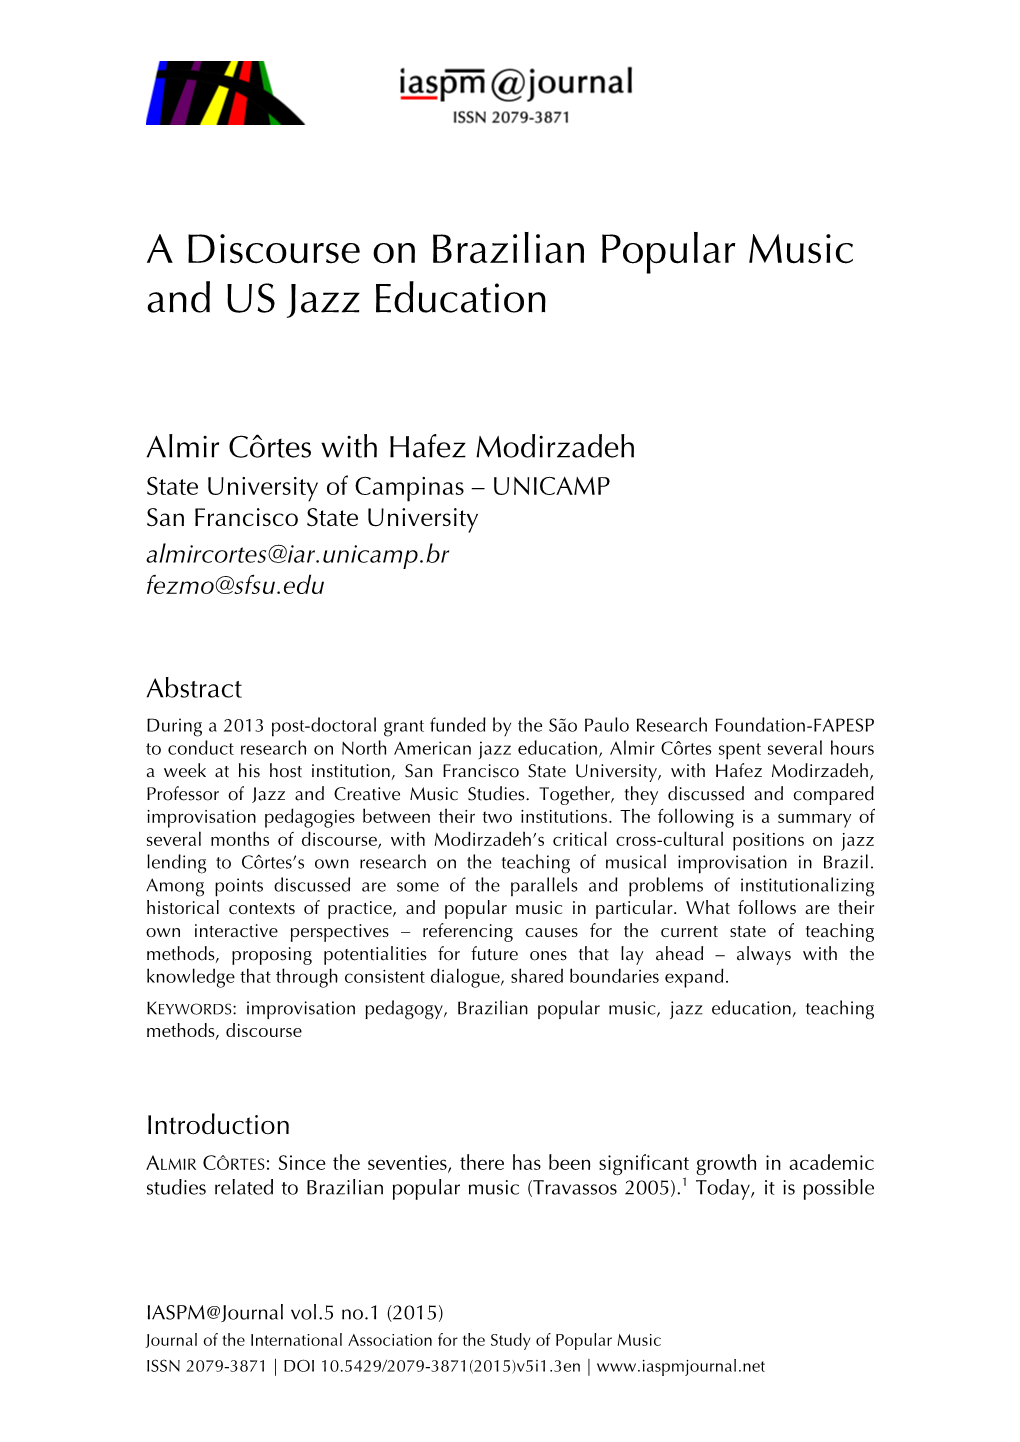 A Discourse on Brazilian Popular Music and US Jazz Education